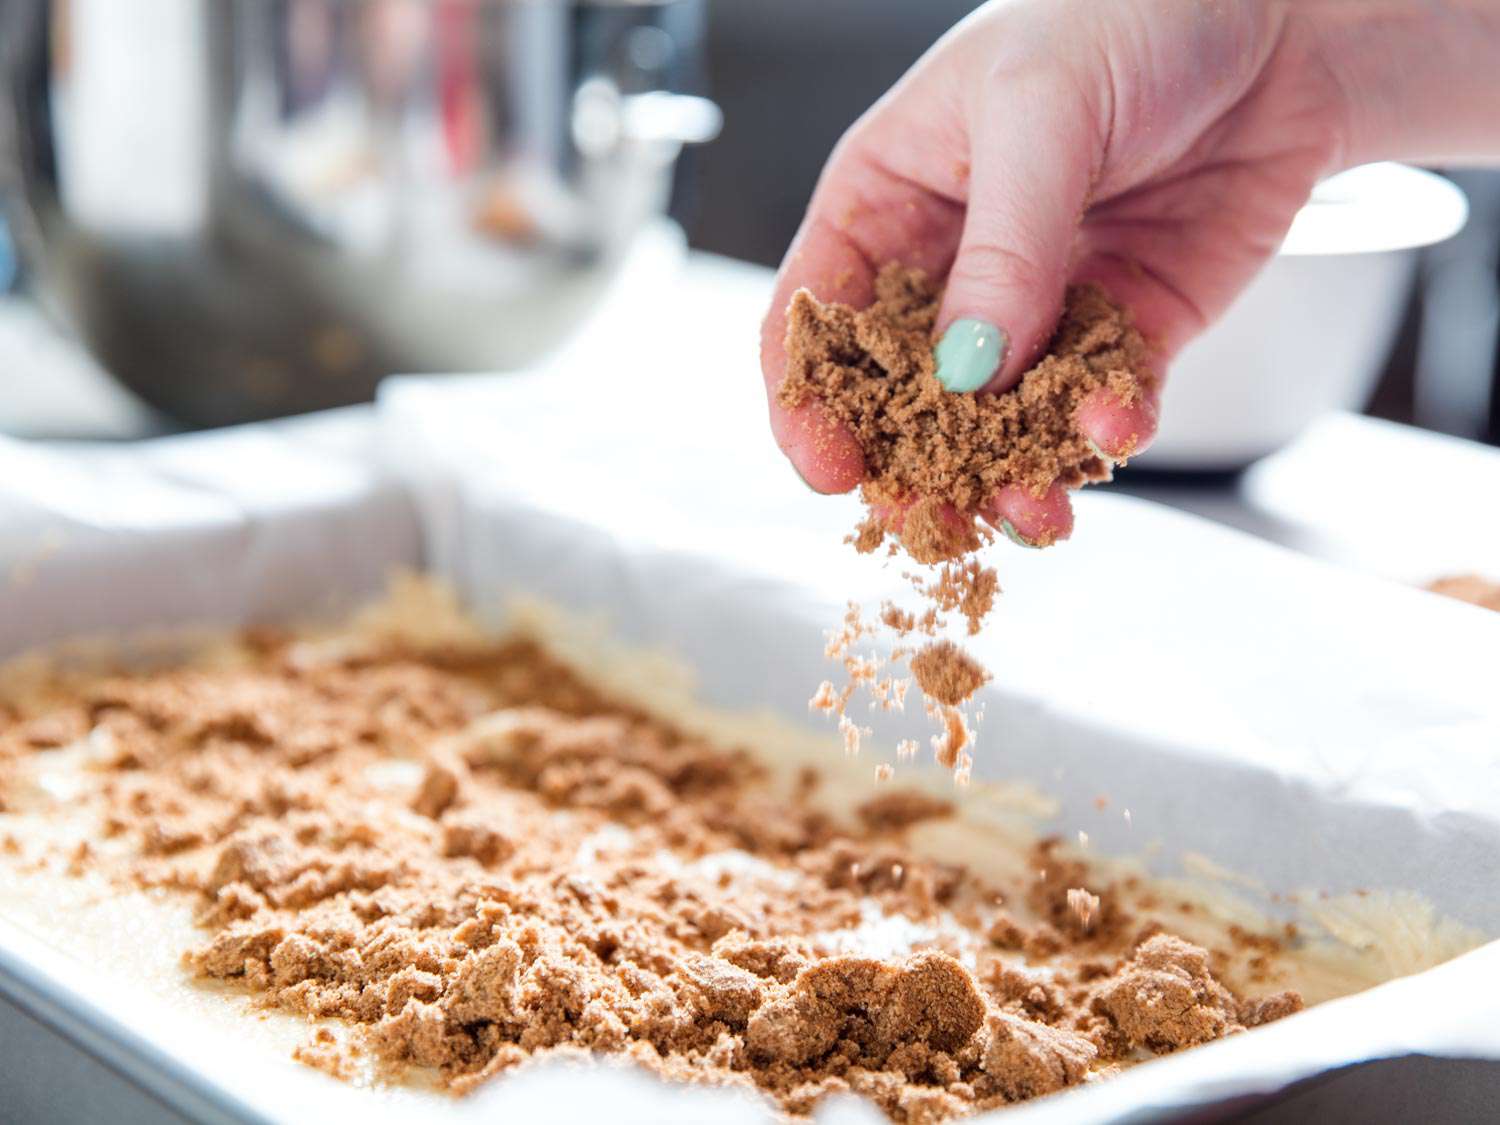 A hand sprinkling crumb topping over batter in a cake pan.